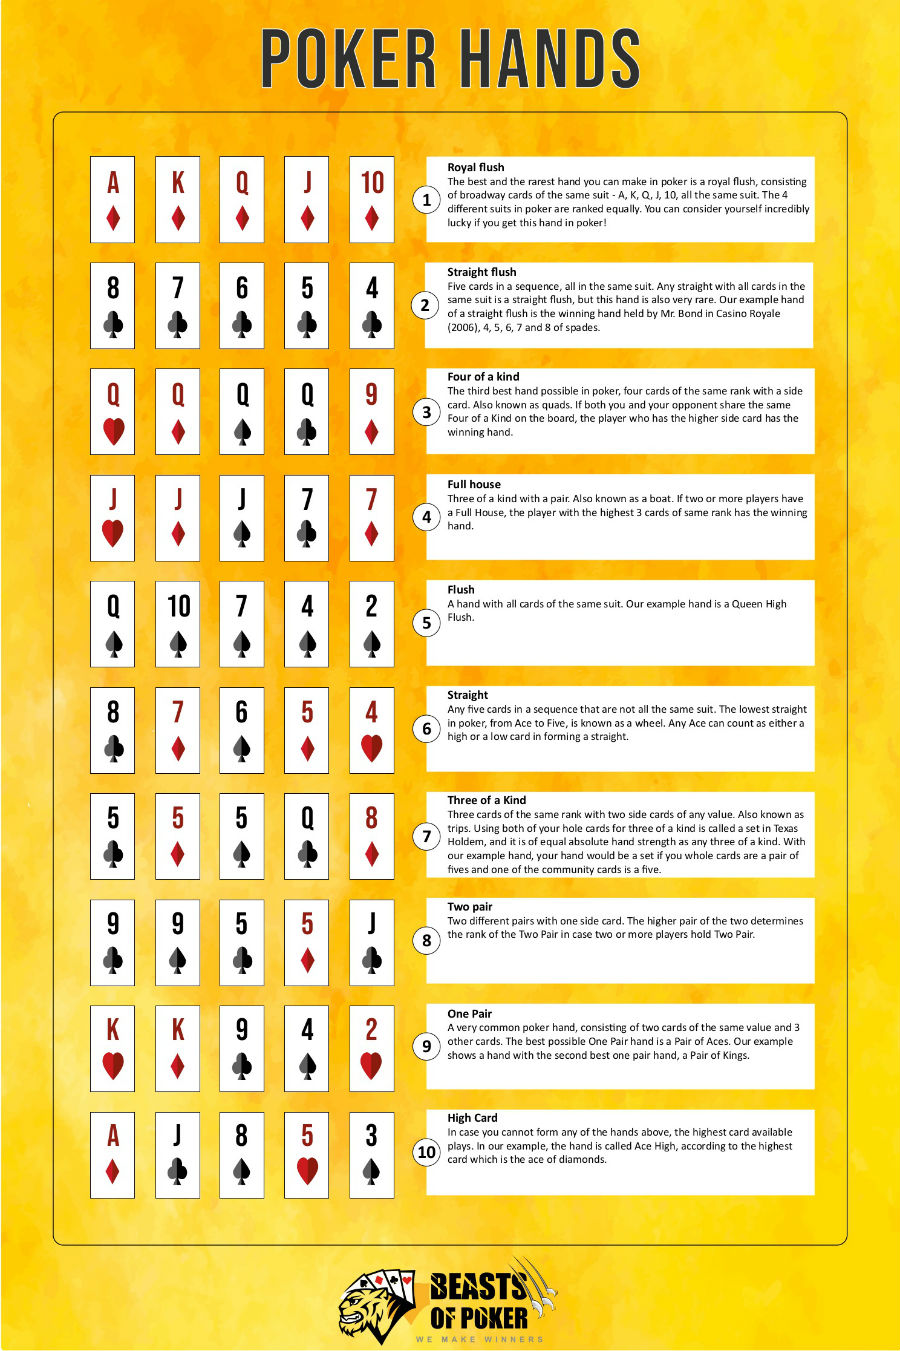 Poker hands ranked from best to worst